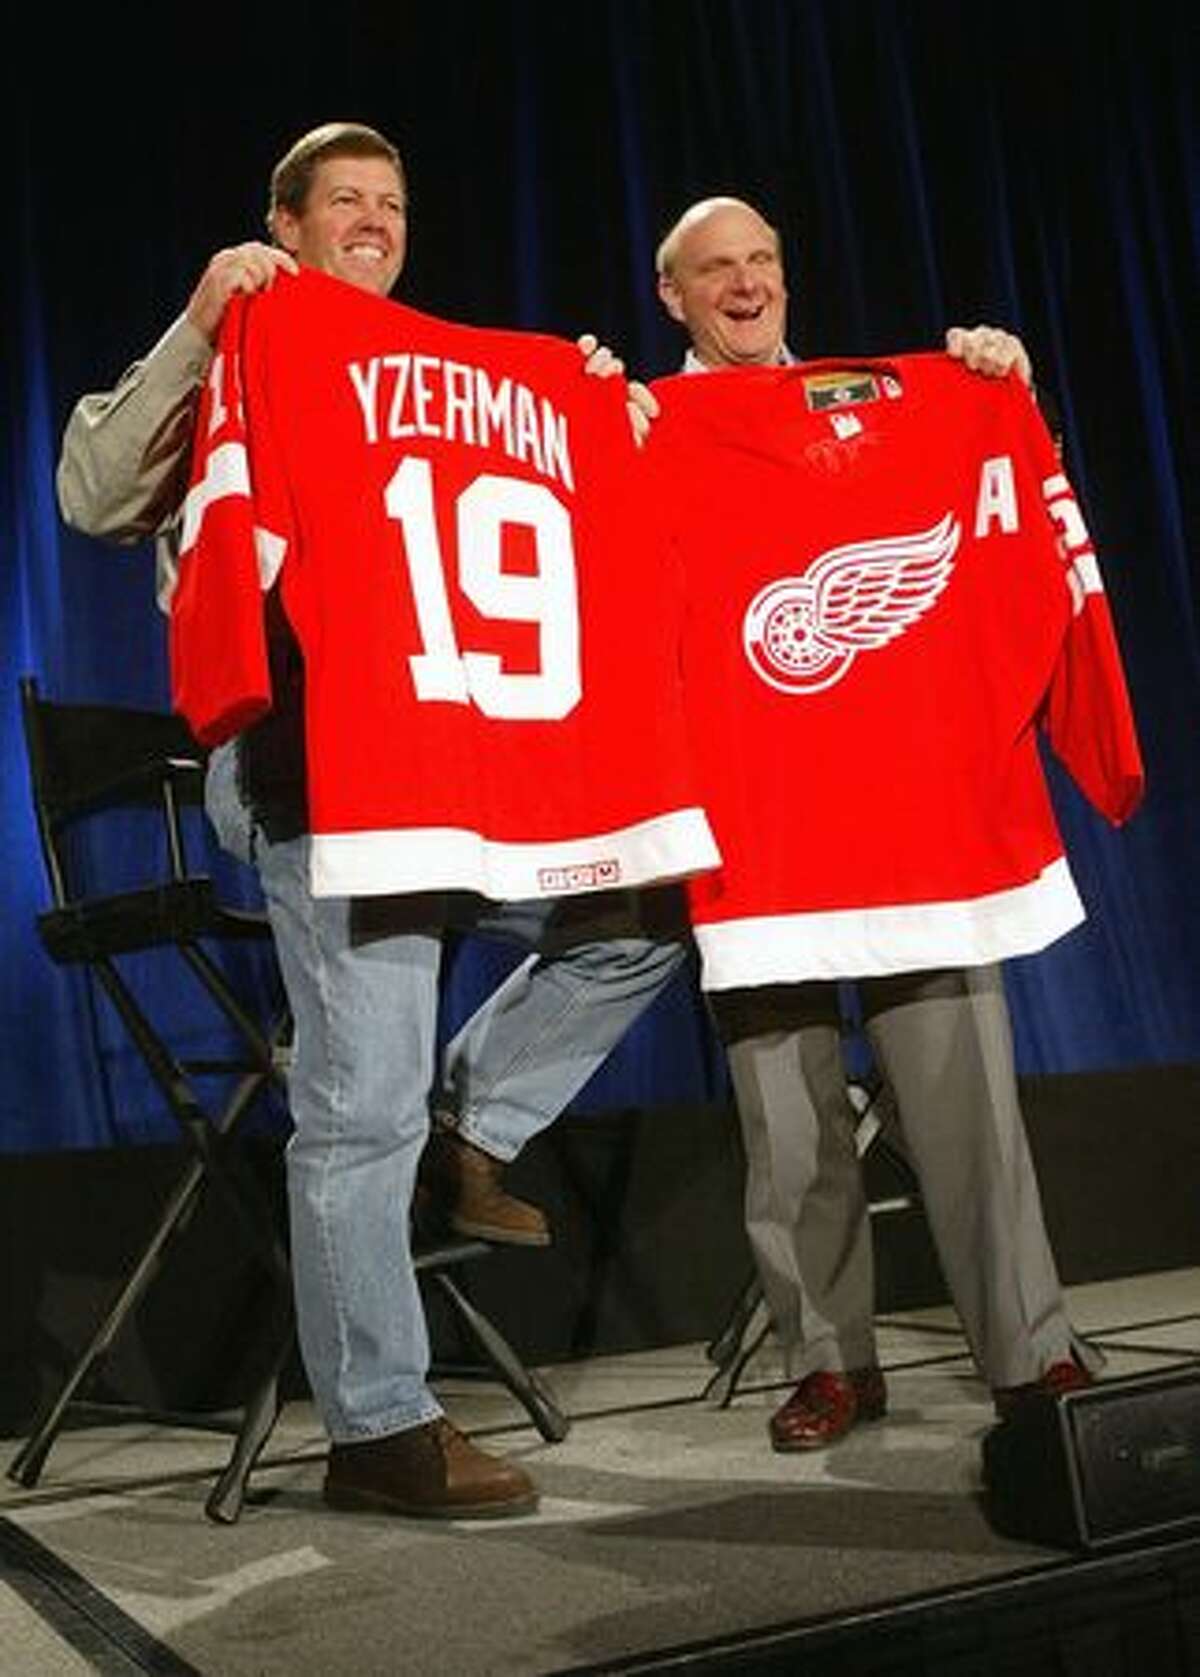 Sun Microsystems CEO Scott McNealy, left, and Ballmer hold up Detroit Red Wings hockey jerseys that they exchanged with each other during a media conference April 2, 2004, in San Francisco. Microsoft and Sun announced they had entered into a broad agreement to enable their products to work better together and to settle all pending litigation between the two companies.